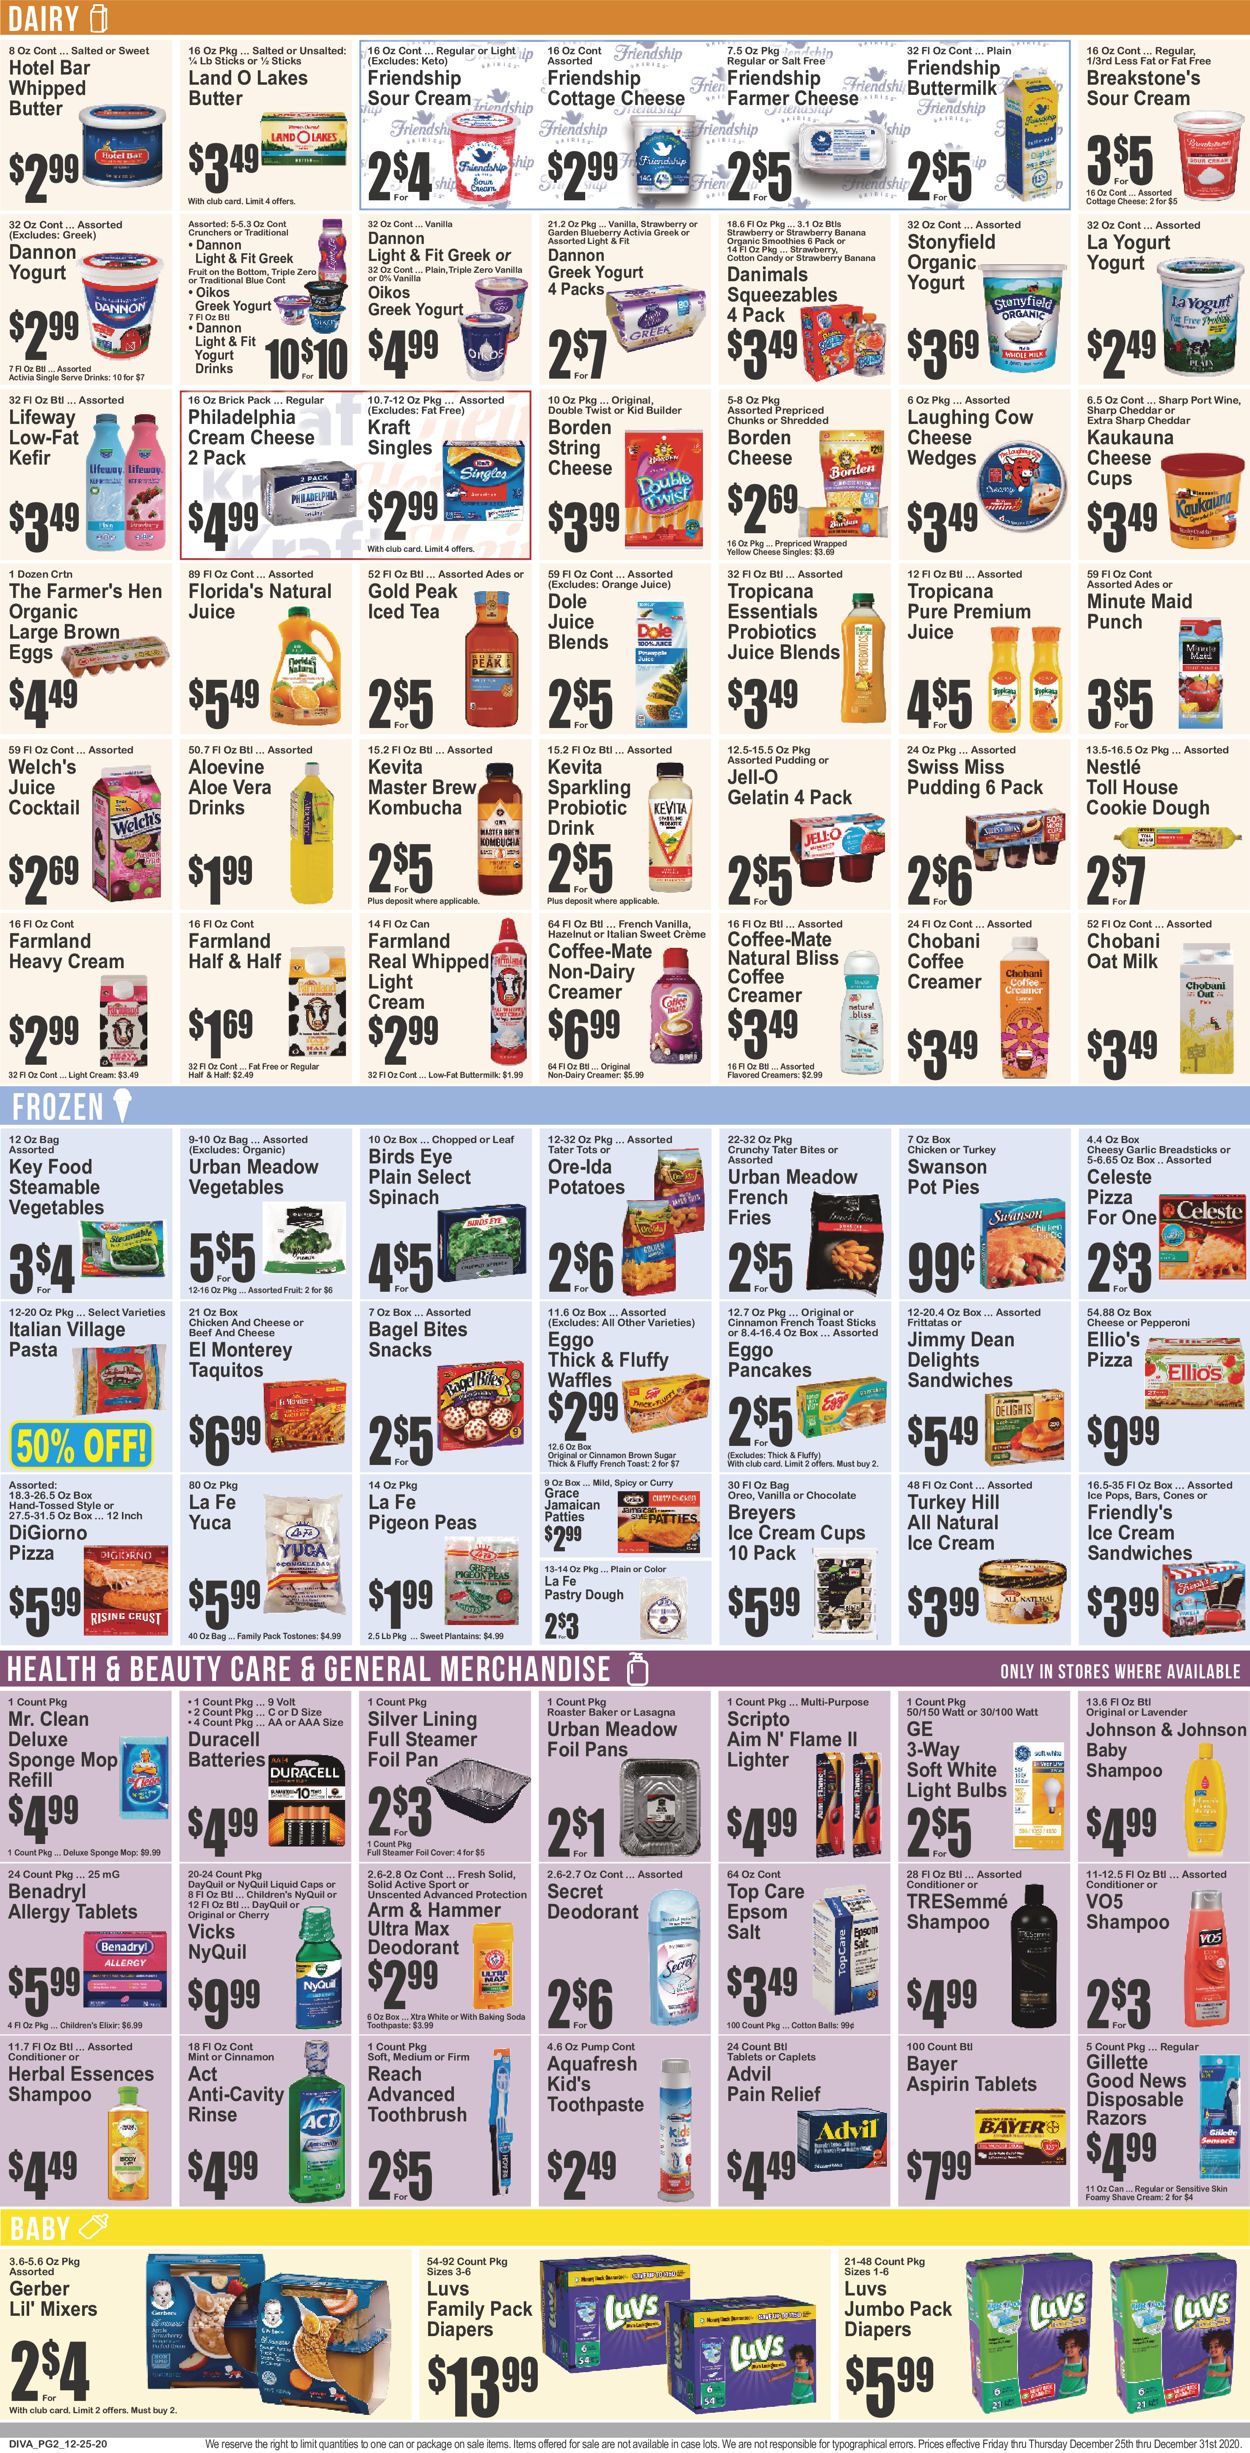 Key Food Ad from 12/25/2020